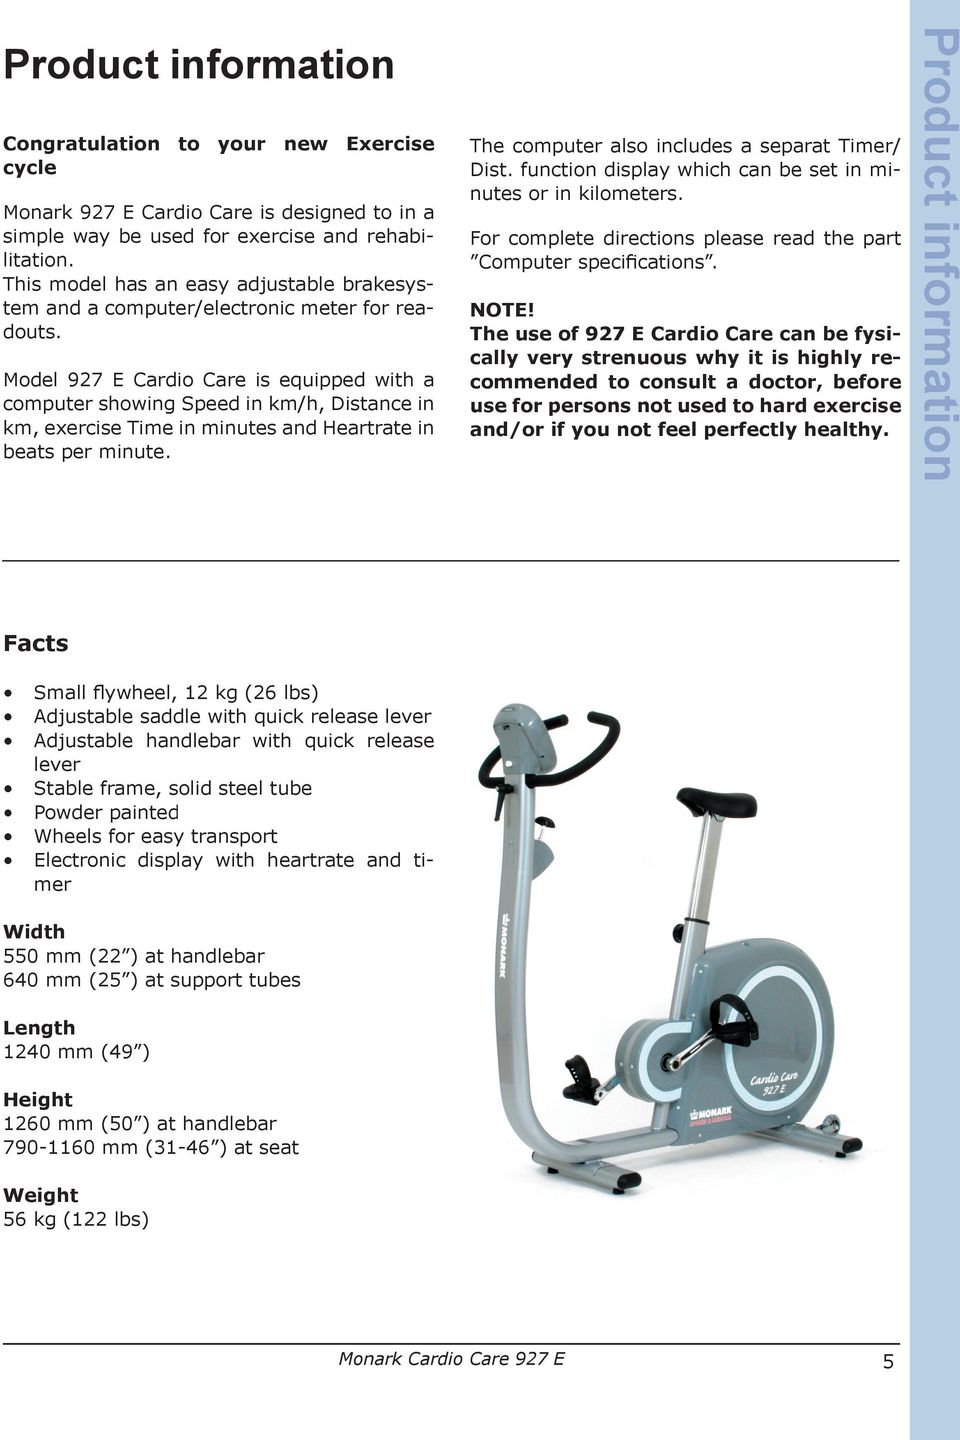 Model 927 E Cardio Care is equipped with a computer showing Speed in km/h, Distance in km, exercise Time in minutes and Heartrate in beats per minute. The computer also includes a separat Timer/ Dist.